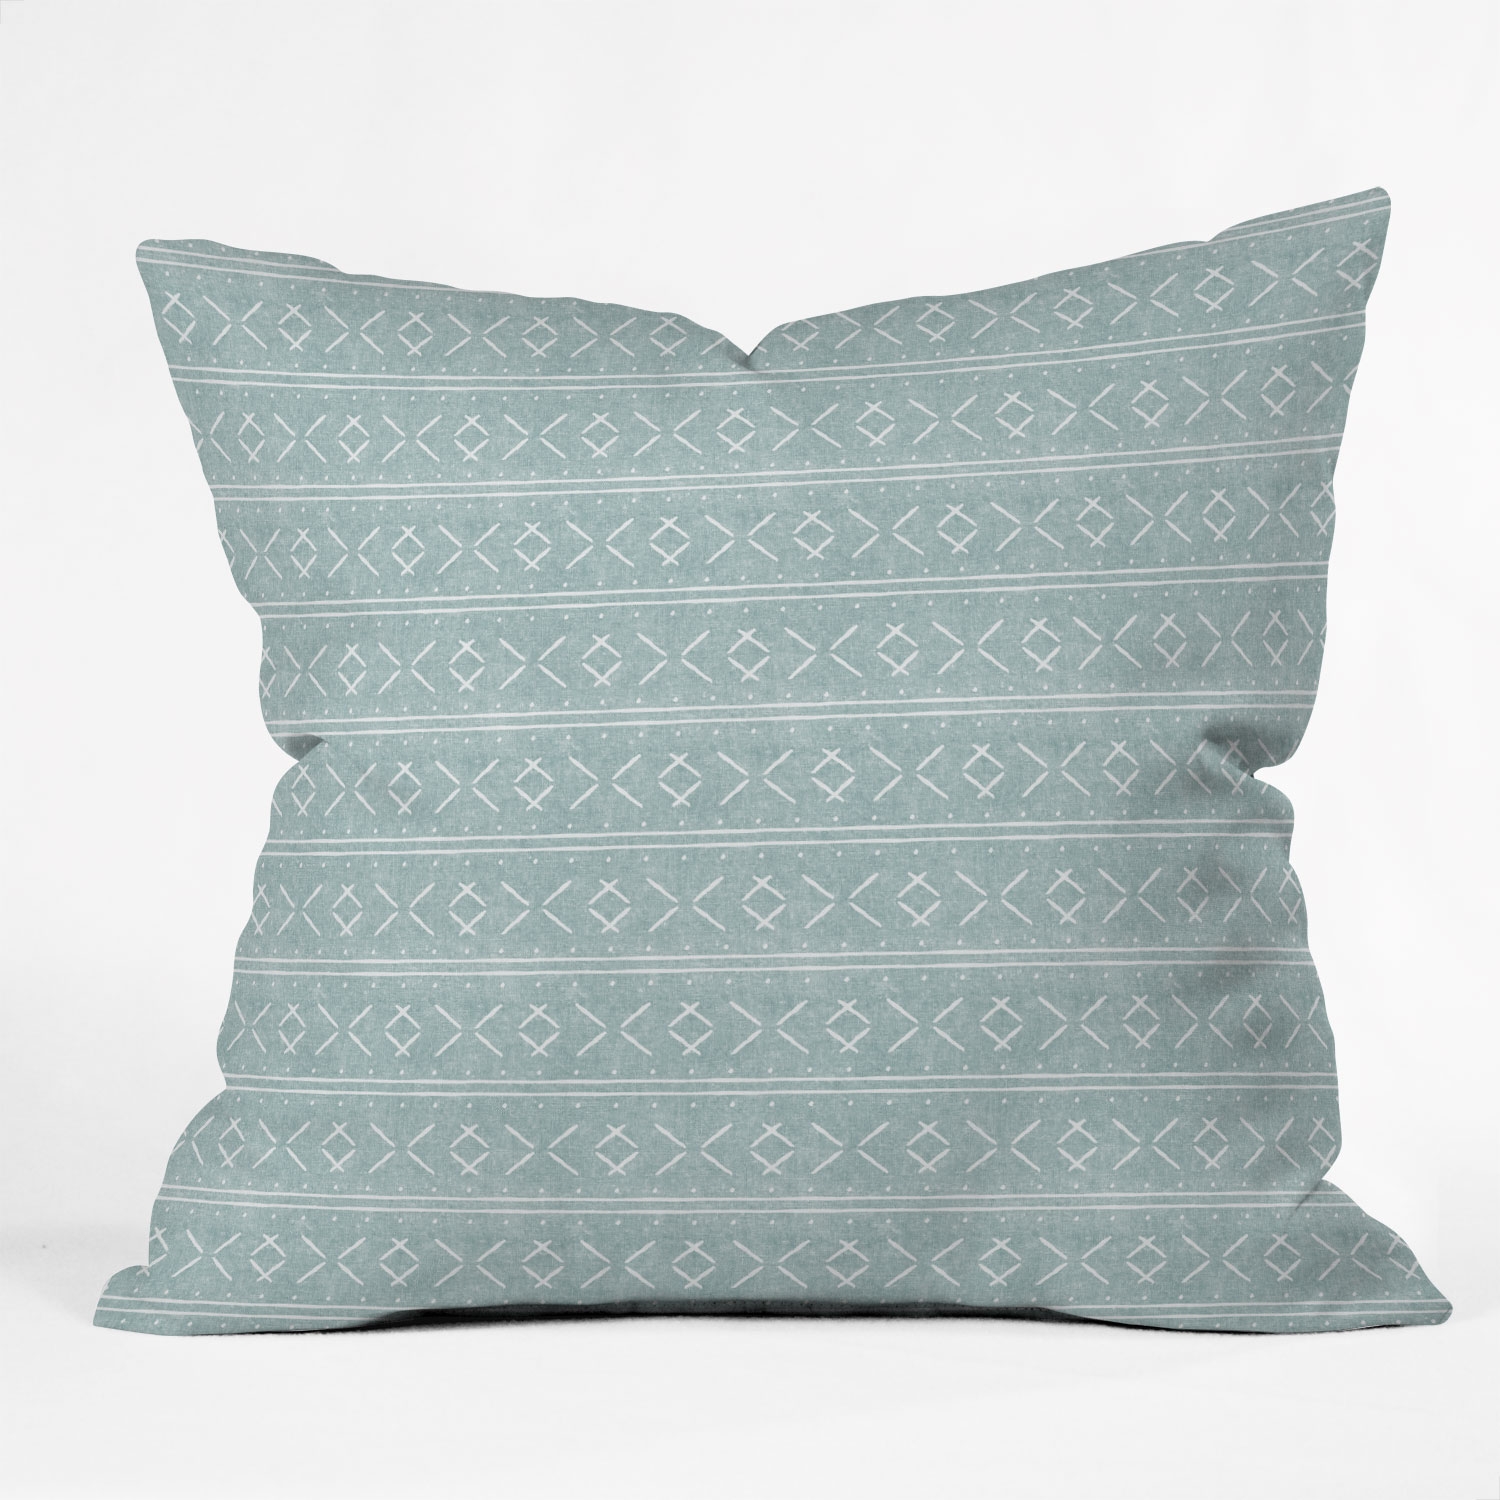 Mud Cloth Stitch Dusty Blue by Little Arrow Design Co - Outdoor Throw Pillow 20" x 20" - Image 1